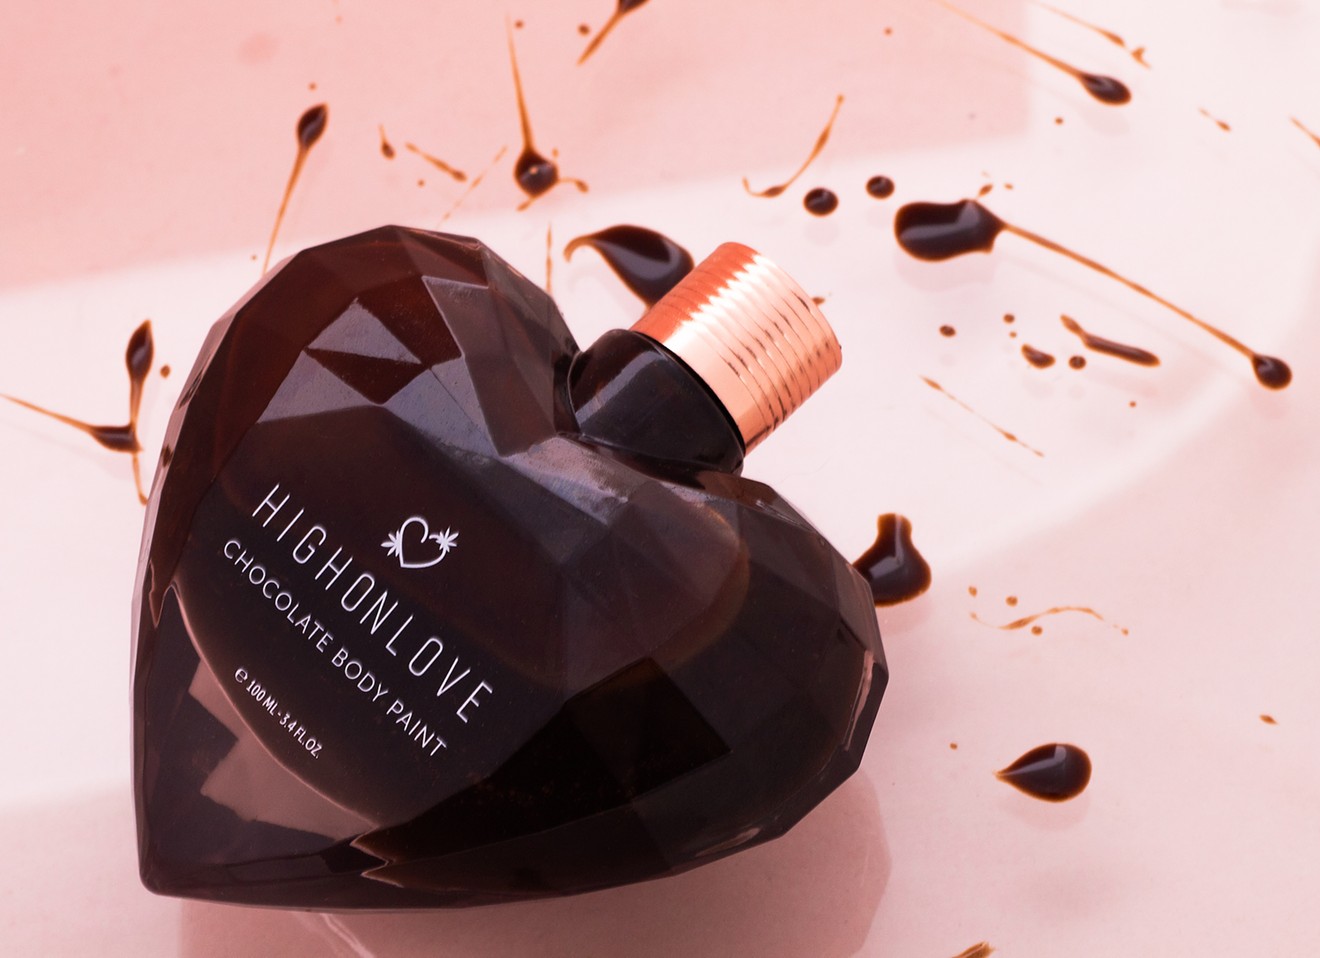 HighOnLove's chocolate body paint was infused with 100 milligrams of THC for Colorado dispensaries.